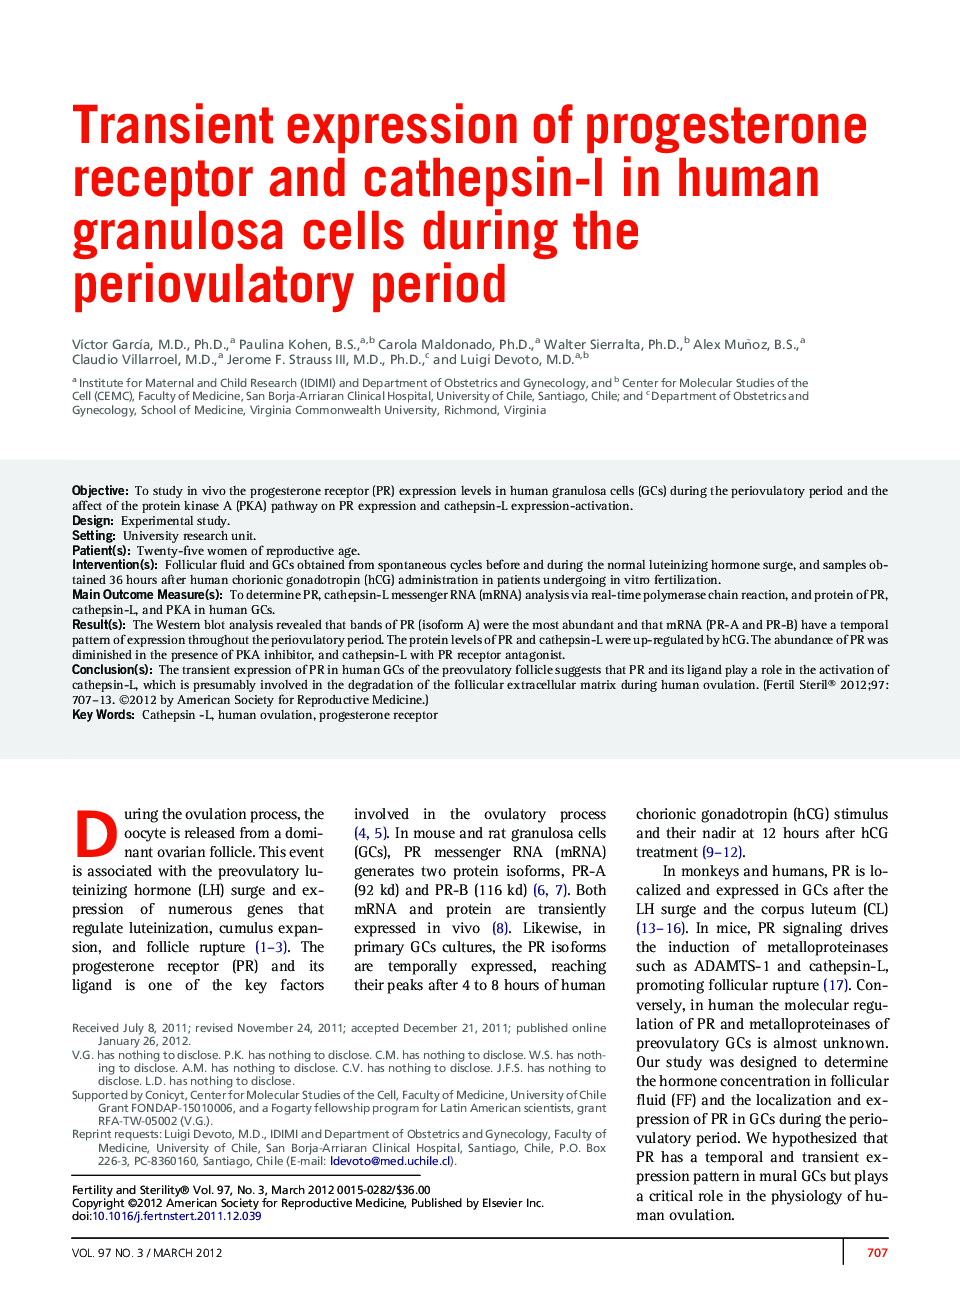 Transient expression of progesterone receptor and cathepsin-l in human granulosa cells during the periovulatory period